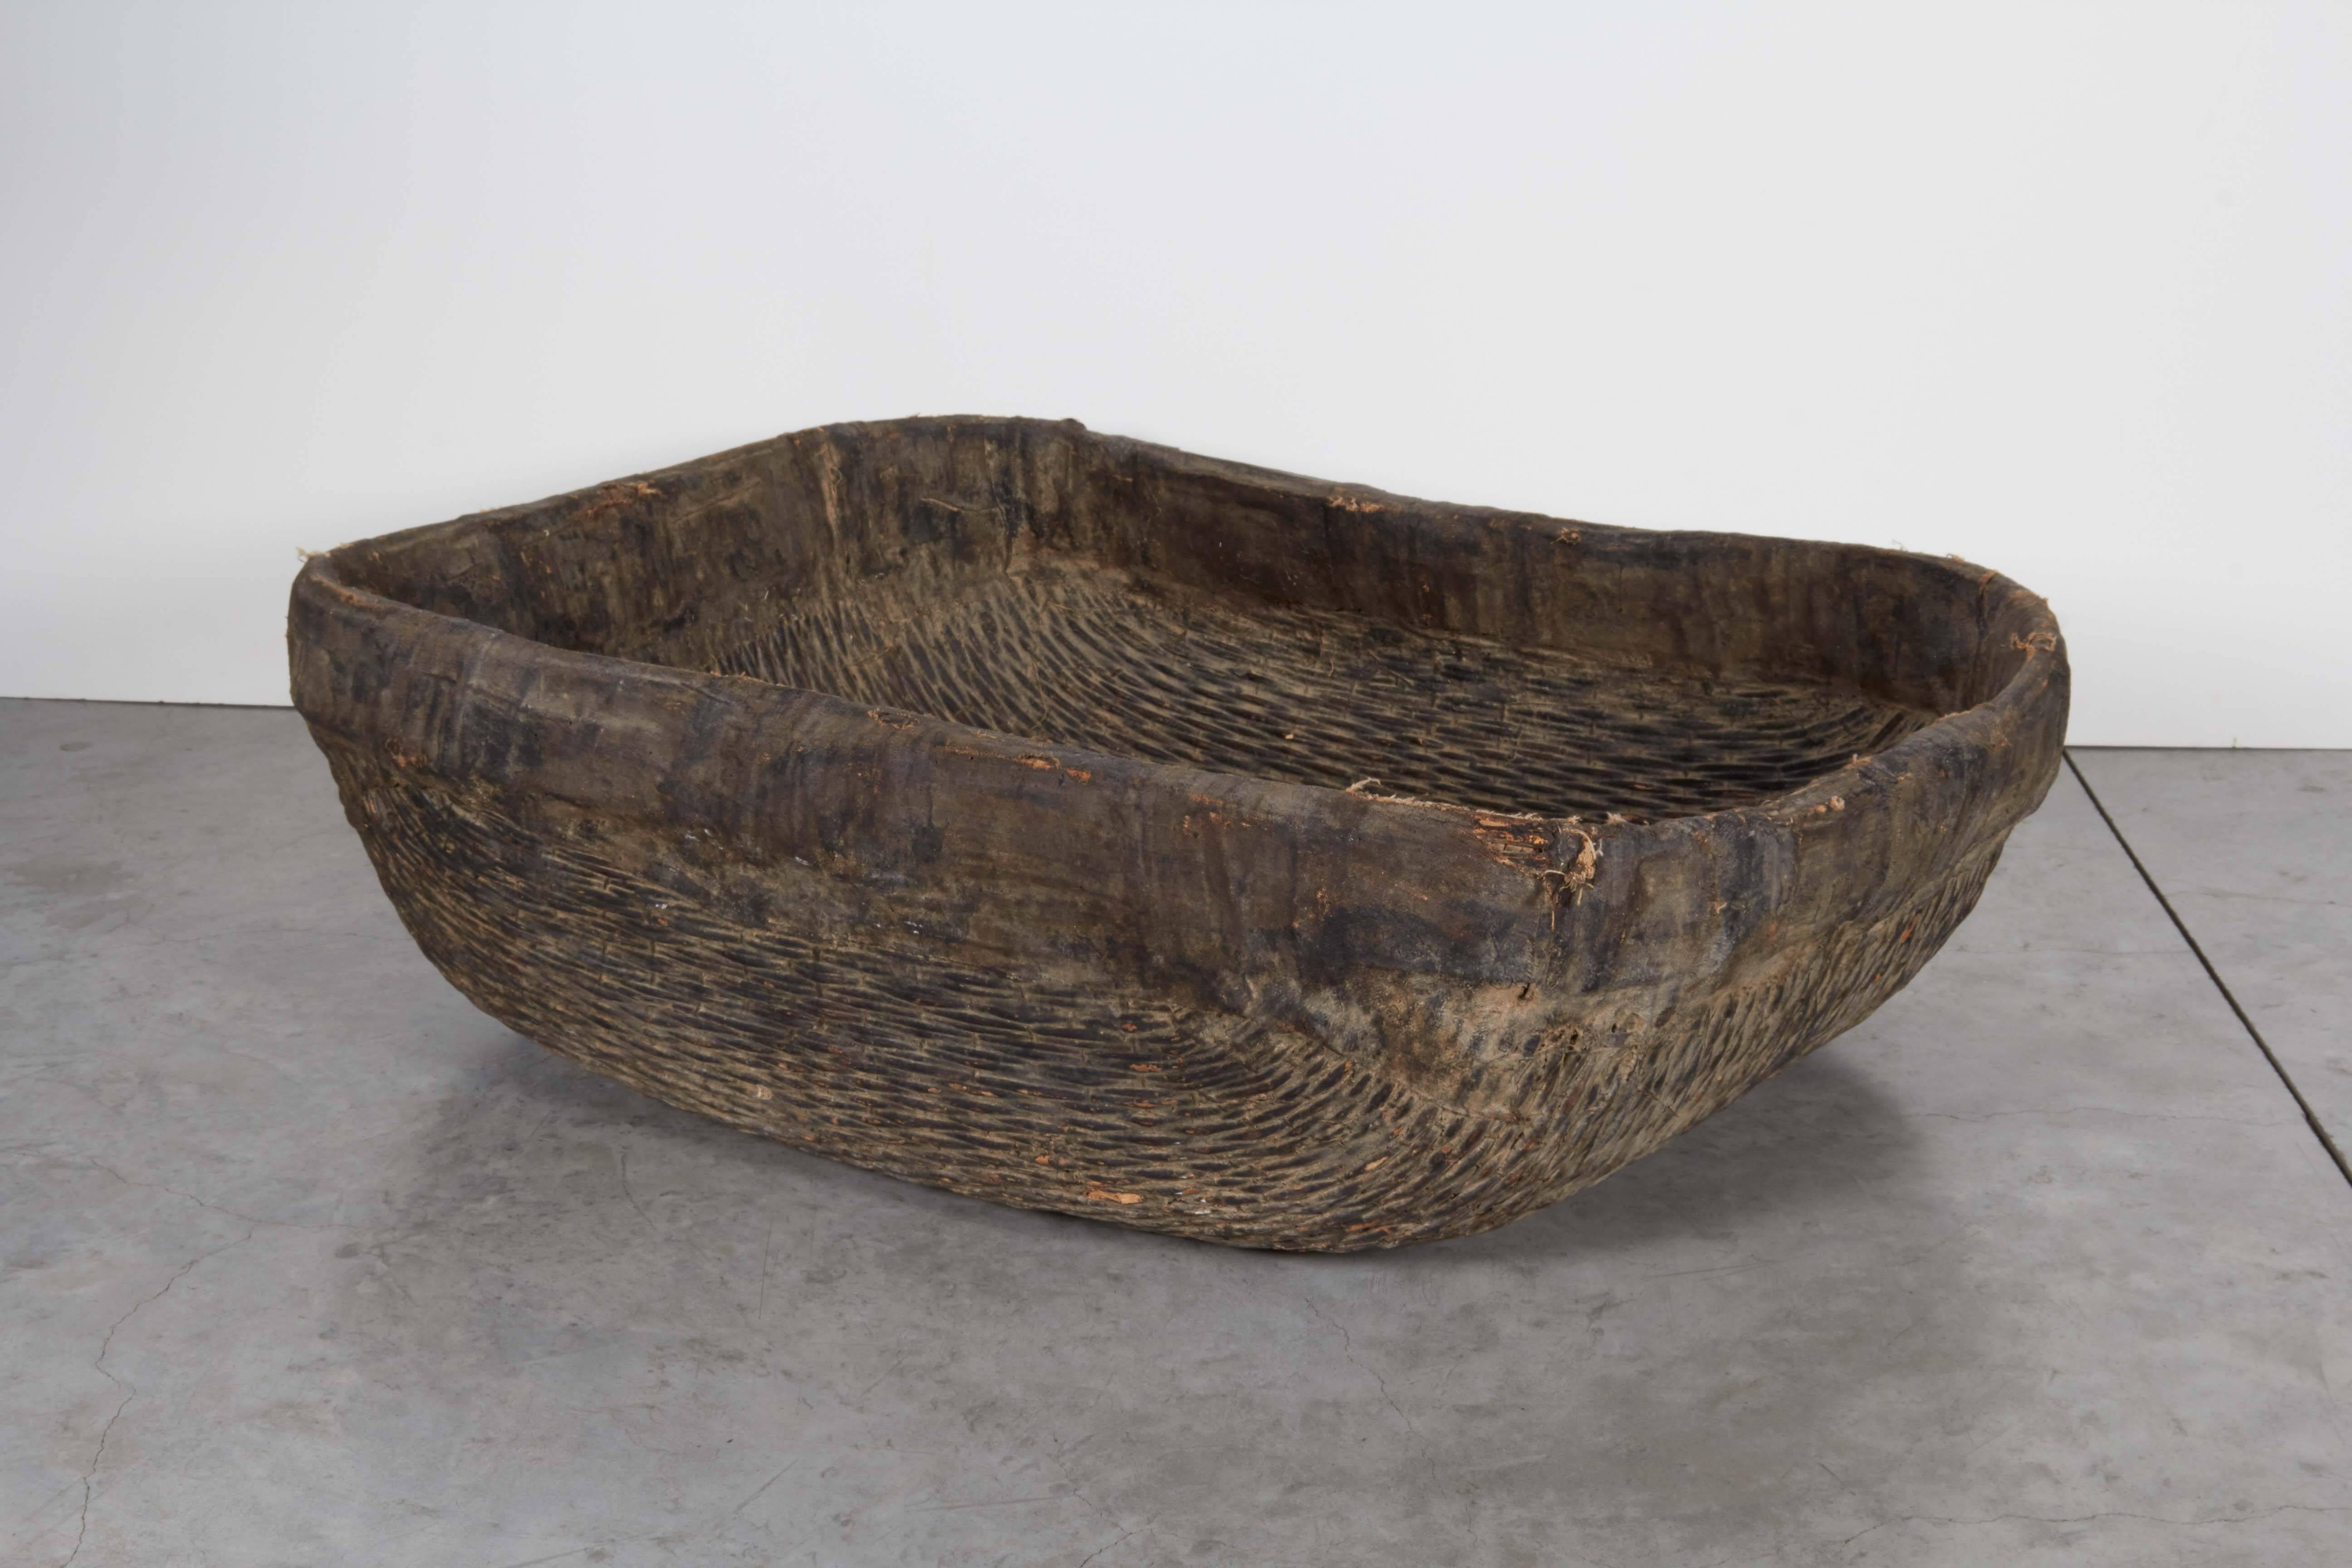 An unusual, large woven willow basket with fabric trim at the top displaying its many years of age in its beautifully worn and faded finish. From Shanxi province, circa 1900.
B445.